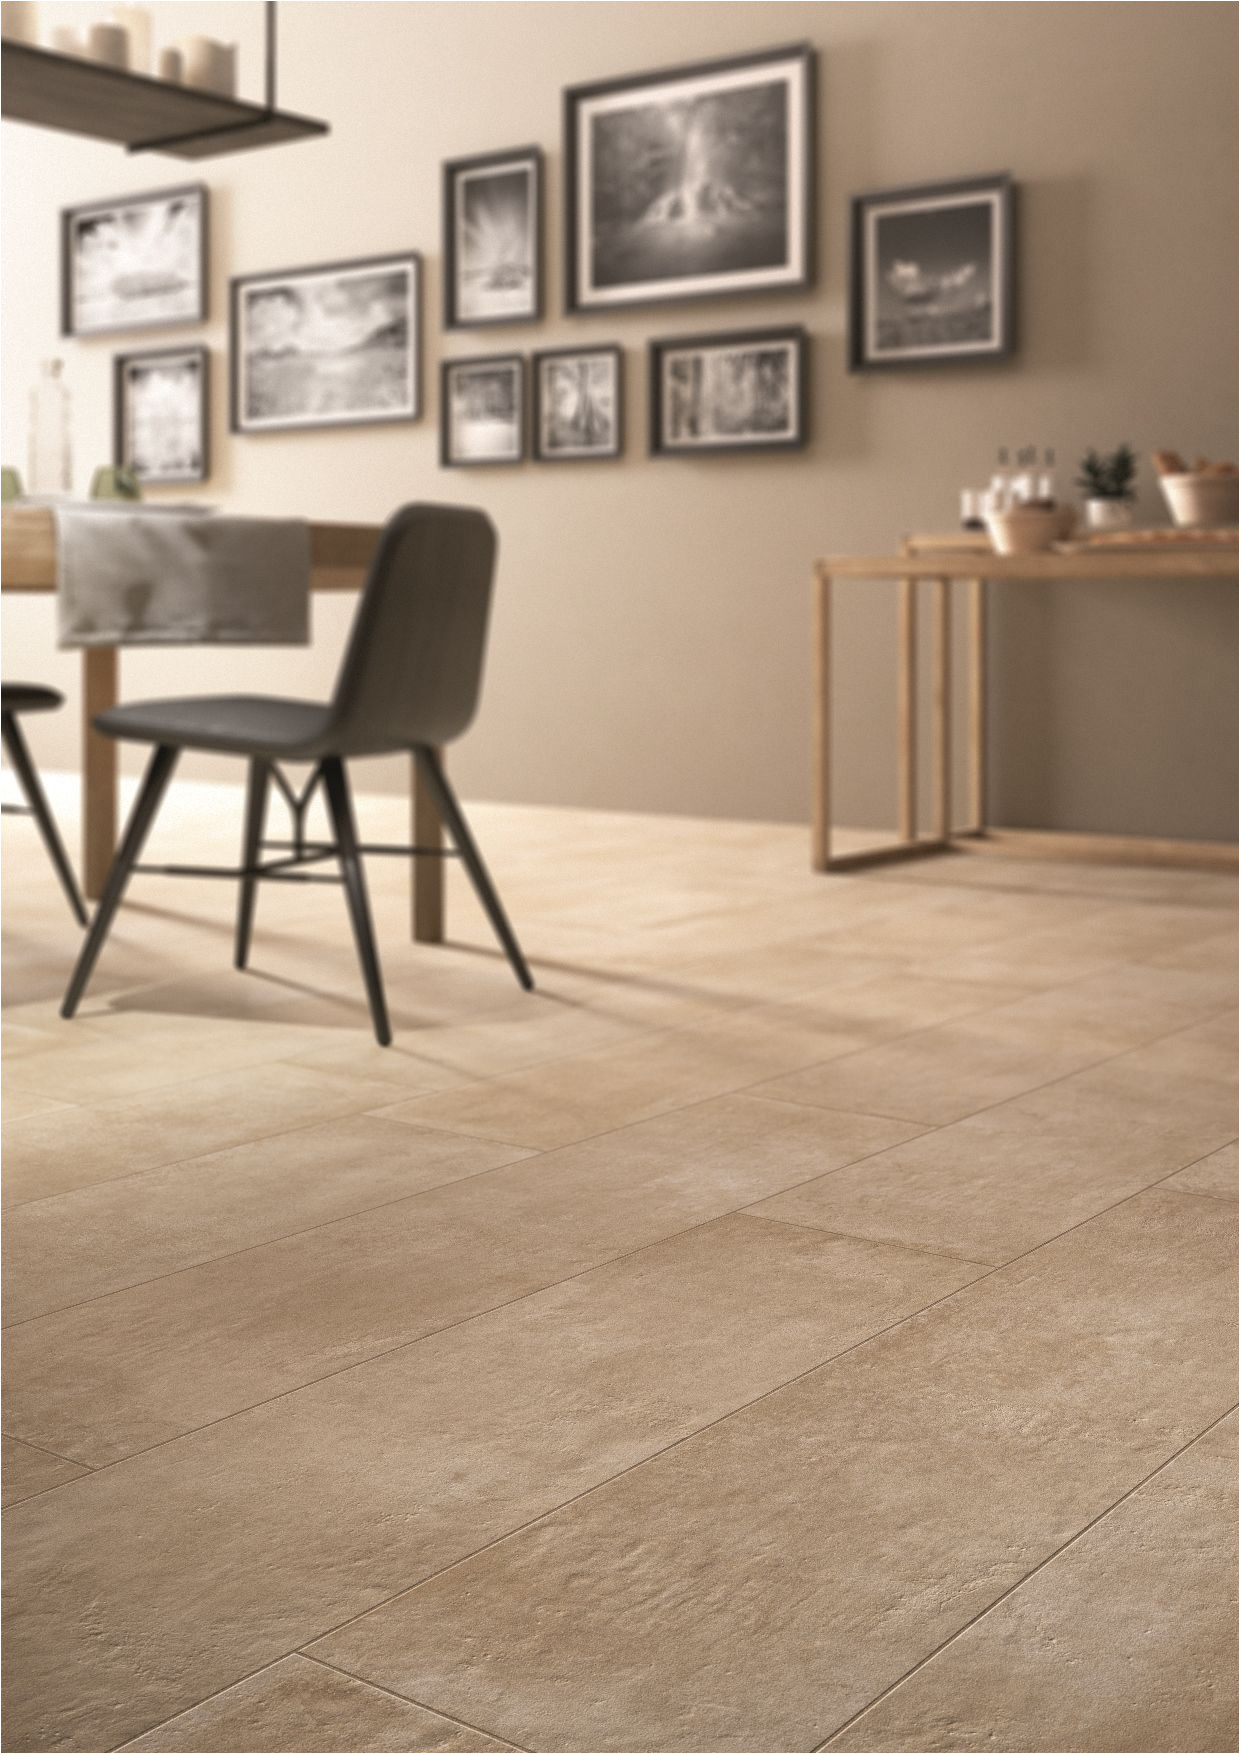 marazzi clays sand colour this tile collection combines the look of concrete with terracotta to create materials of great value and immense visual